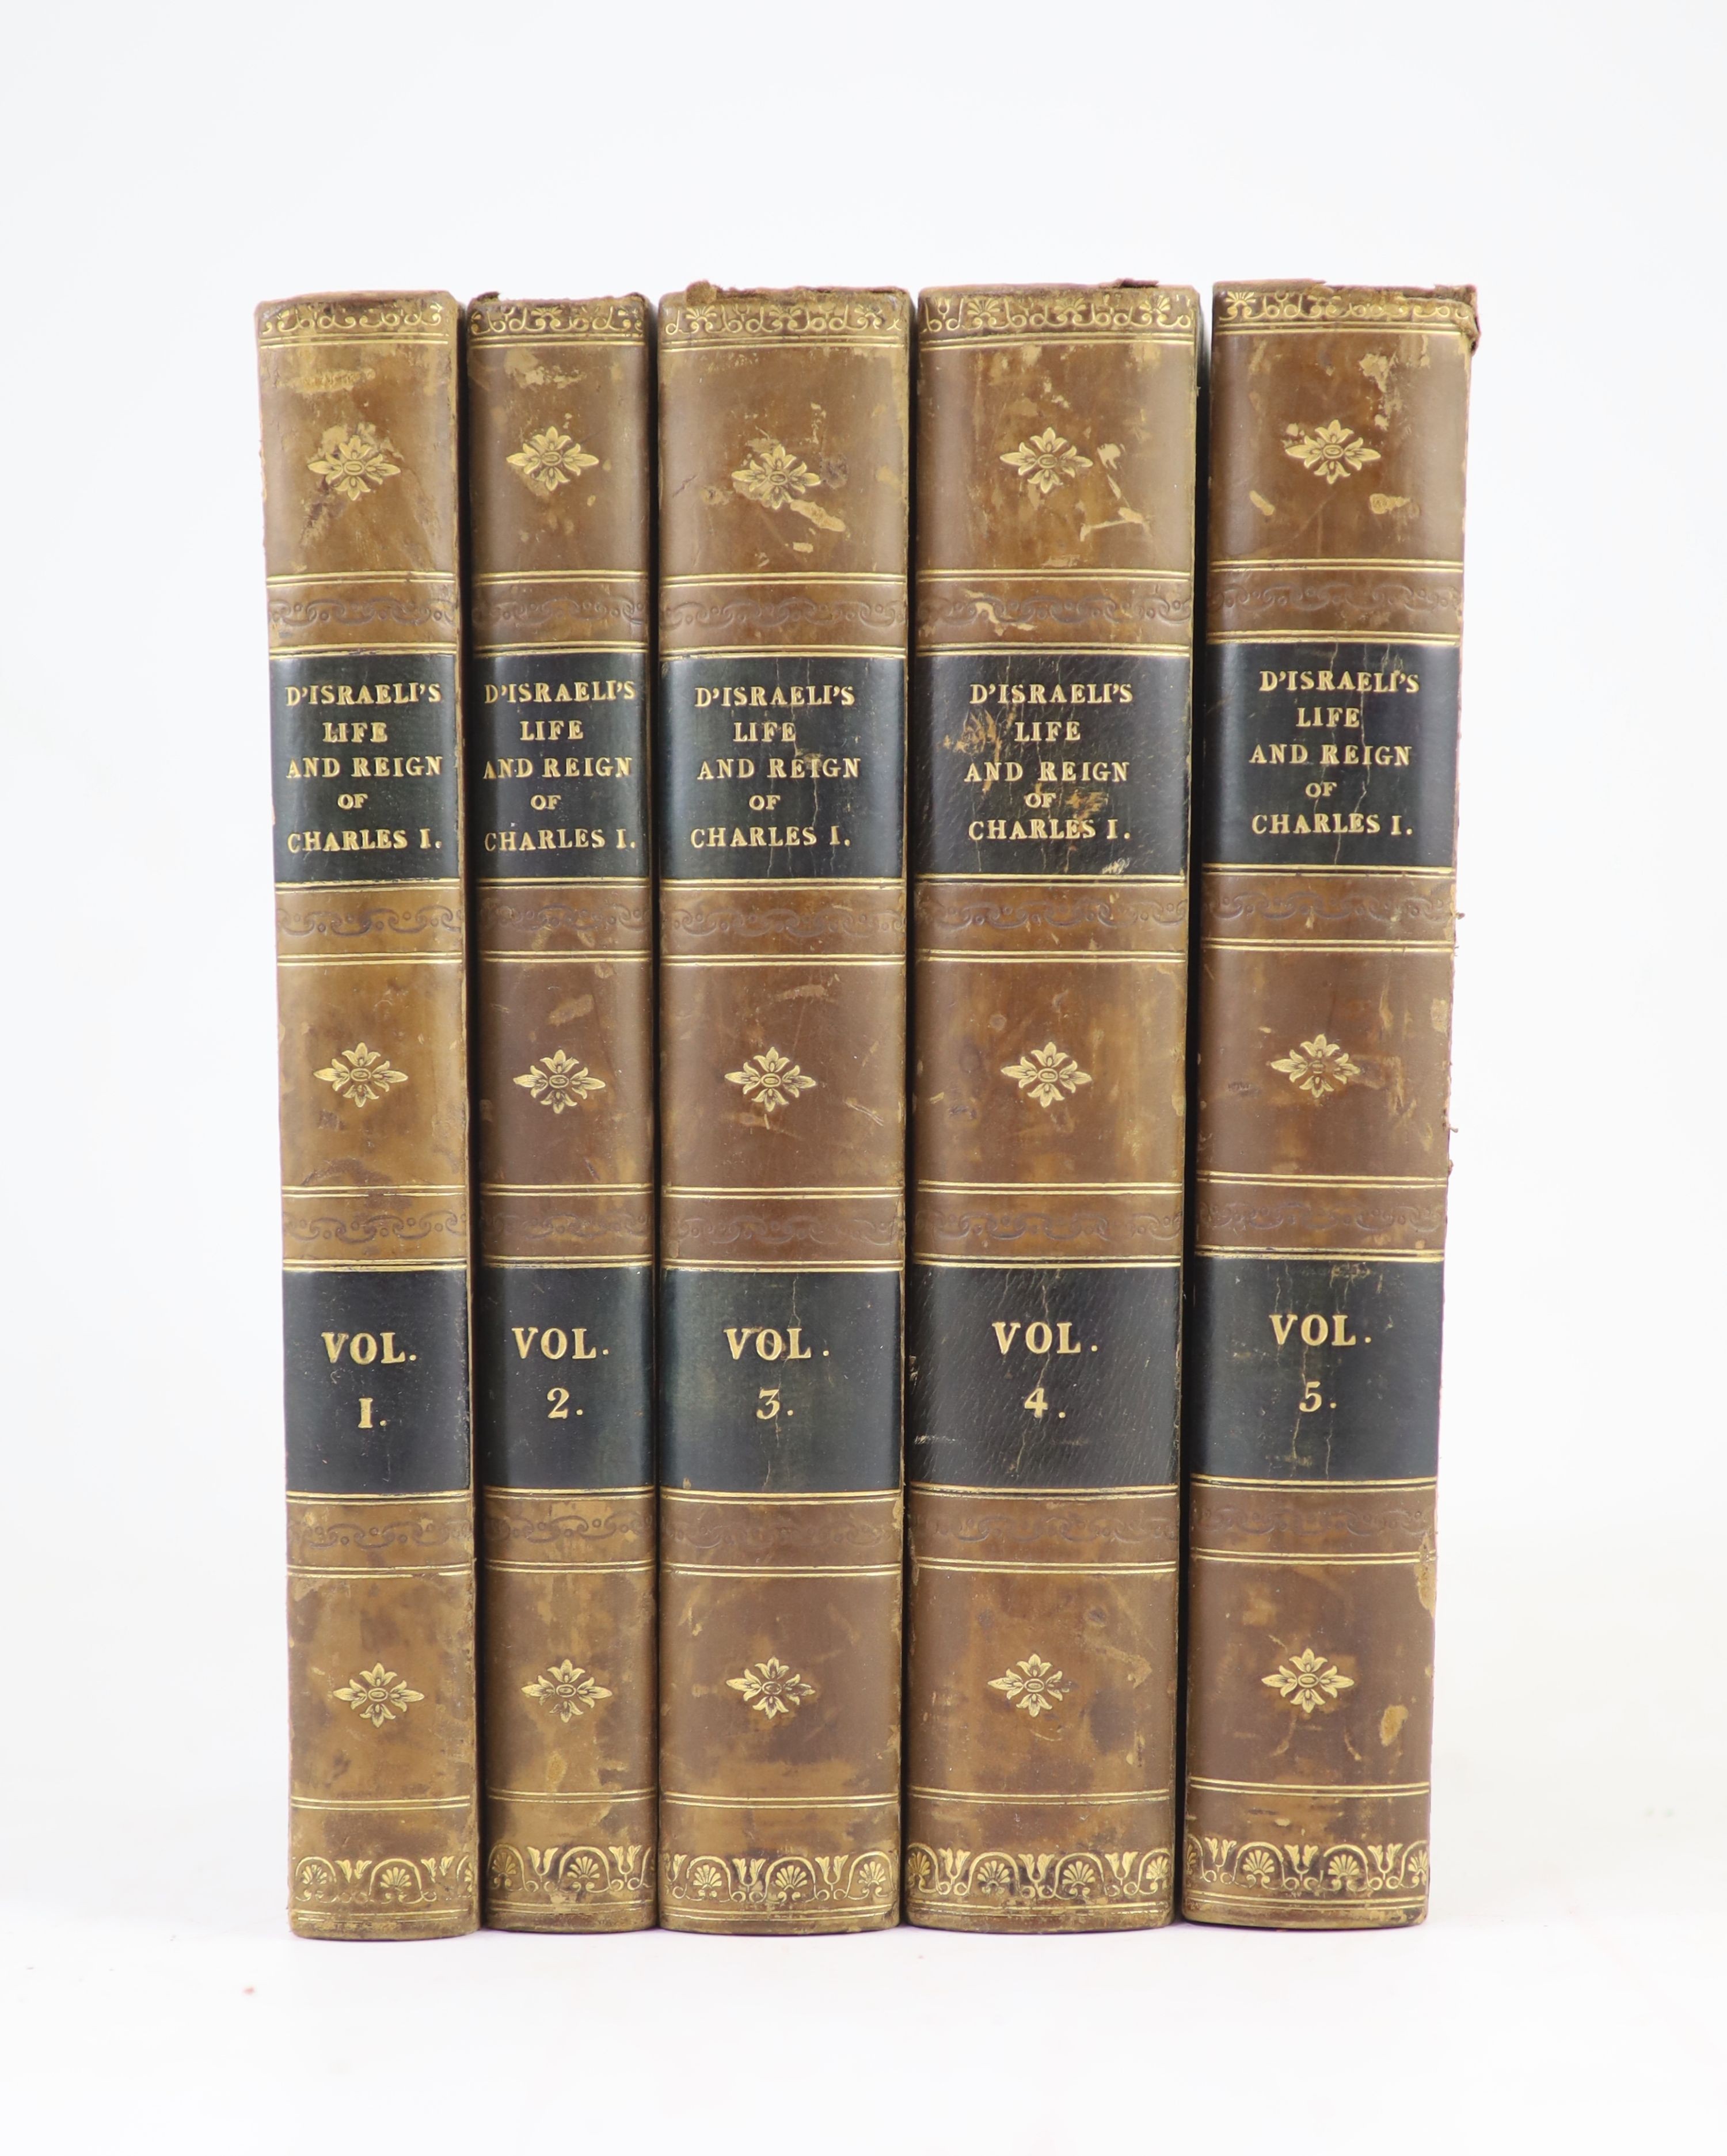 D’Israeli, I [Isaac] - Commentaries of the Life and Reign of Charles the First, King of England. 5 Vols. Half morocco and marbled paper. Gilt decorated spine with two morocco labels. Sprinkled edges. Henry Colburn, Londo